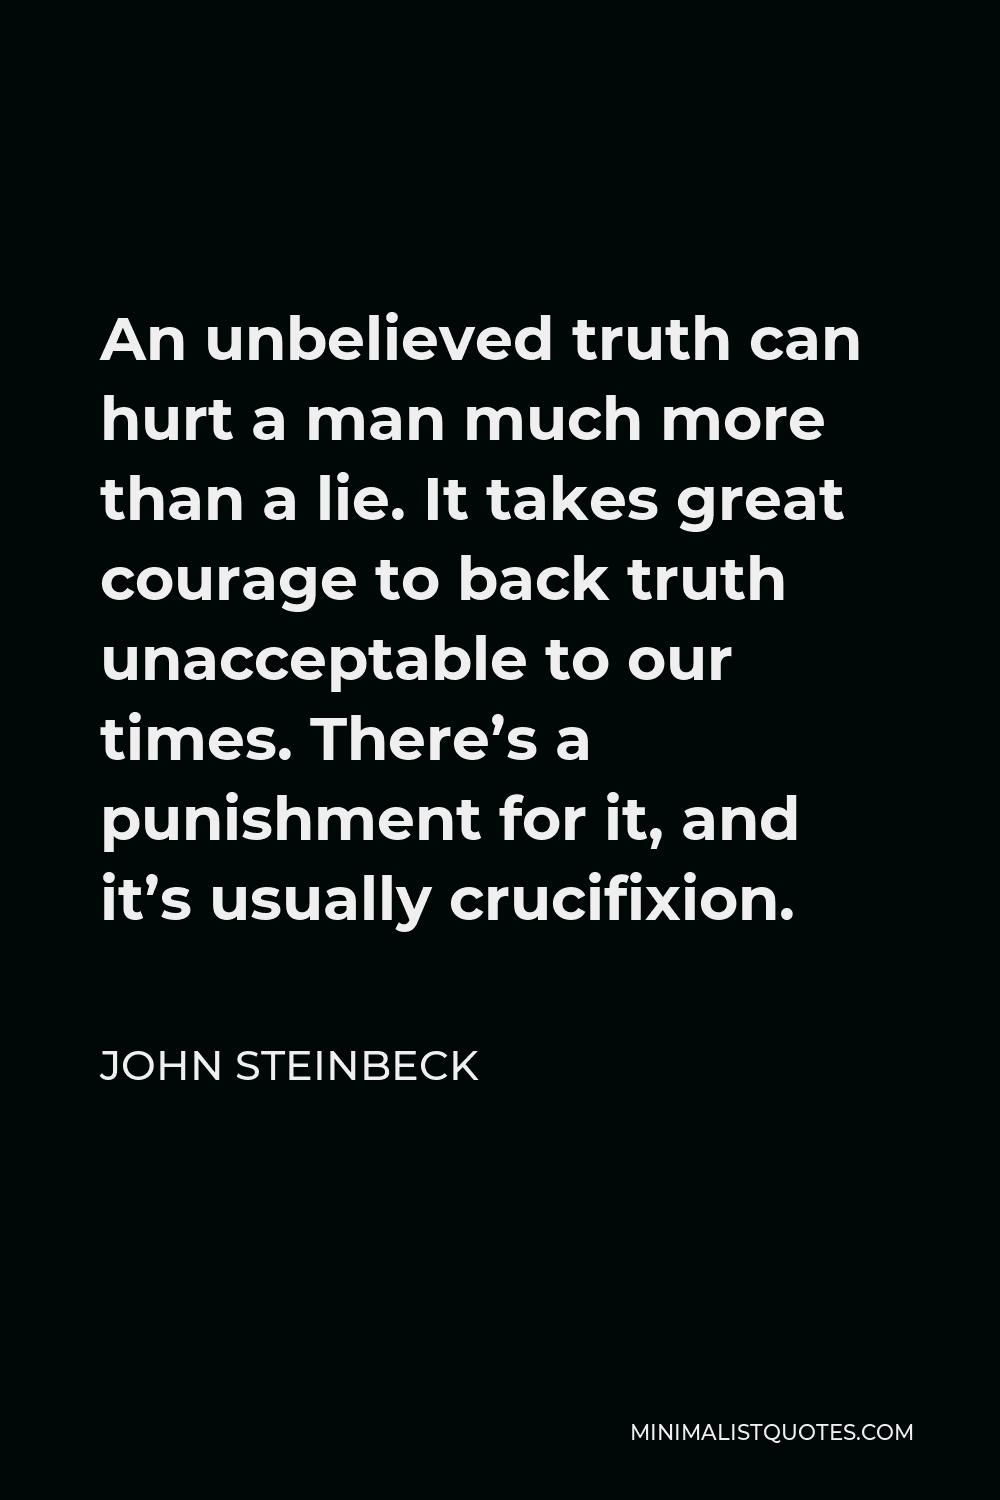 John Steinbeck Quote - An unbelieved truth can hurt a man much more than a lie. It takes great courage to back truth unacceptable to our times. There’s a punishment for it, and it’s usually crucifixion.